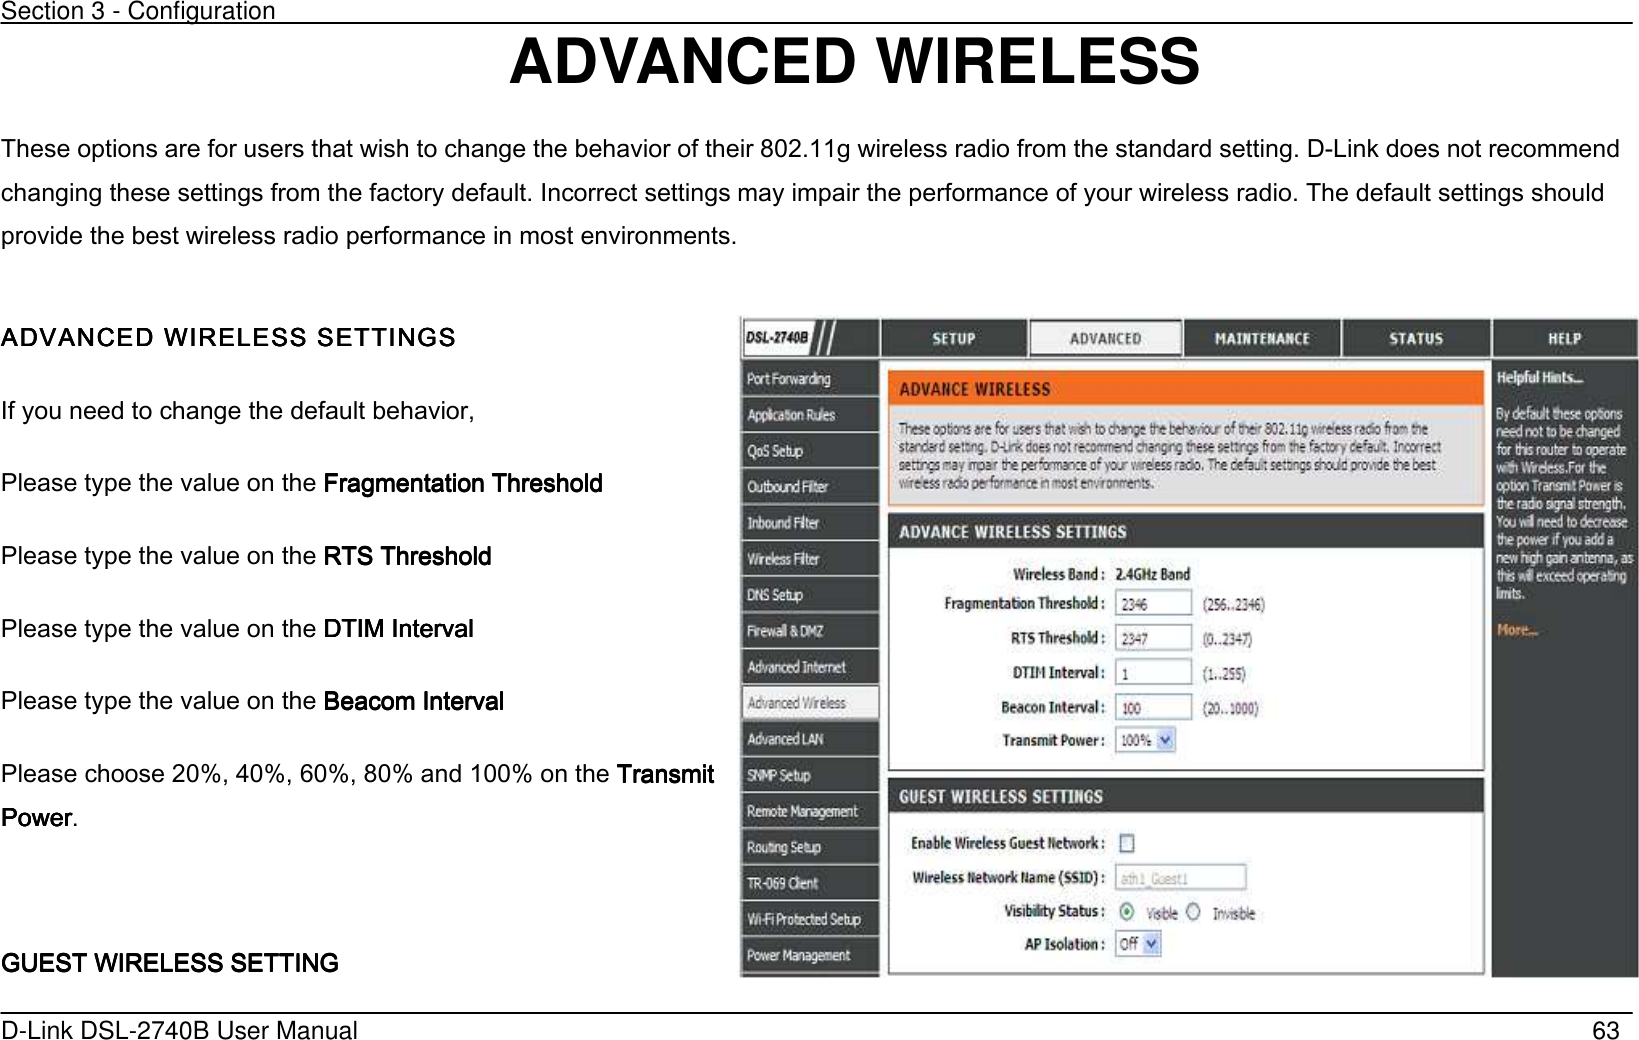 Section 3 - Configuration   D-Link DSL-2740B User Manual                                                  63 ADVANCED WIRELESS   These options are for users that wish to change the behavior of their 802.11g wireless radio from the standard setting. D-Link does not recommend changing these settings from the factory default. Incorrect settings may impair the performance of your wireless radio. The default settings should provide the best wireless radio performance in most environments.  ADVANCED ADVANCED ADVANCED ADVANCED WIRELESSWIRELESSWIRELESSWIRELESS SETTINGS SETTINGS SETTINGS SETTINGS    If you need to change the default behavior, Please type the value on the Fragmentation ThresholdFragmentation ThresholdFragmentation ThresholdFragmentation Threshold        Please type the value on the RTS Threshold RTS Threshold RTS Threshold RTS Threshold        Please type the value on the DTIM Interval DTIM Interval DTIM Interval DTIM Interval            Please type the value on the    Beacom IntervBeacom IntervBeacom IntervBeacom Intervalalalal    Please choose 20%, 40%, 60%, 80% and 100% on the Transmit Transmit Transmit Transmit PowerPowerPowerPower.  GUEST WIRELESS SETTINGGUEST WIRELESS SETTINGGUEST WIRELESS SETTINGGUEST WIRELESS SETTING     